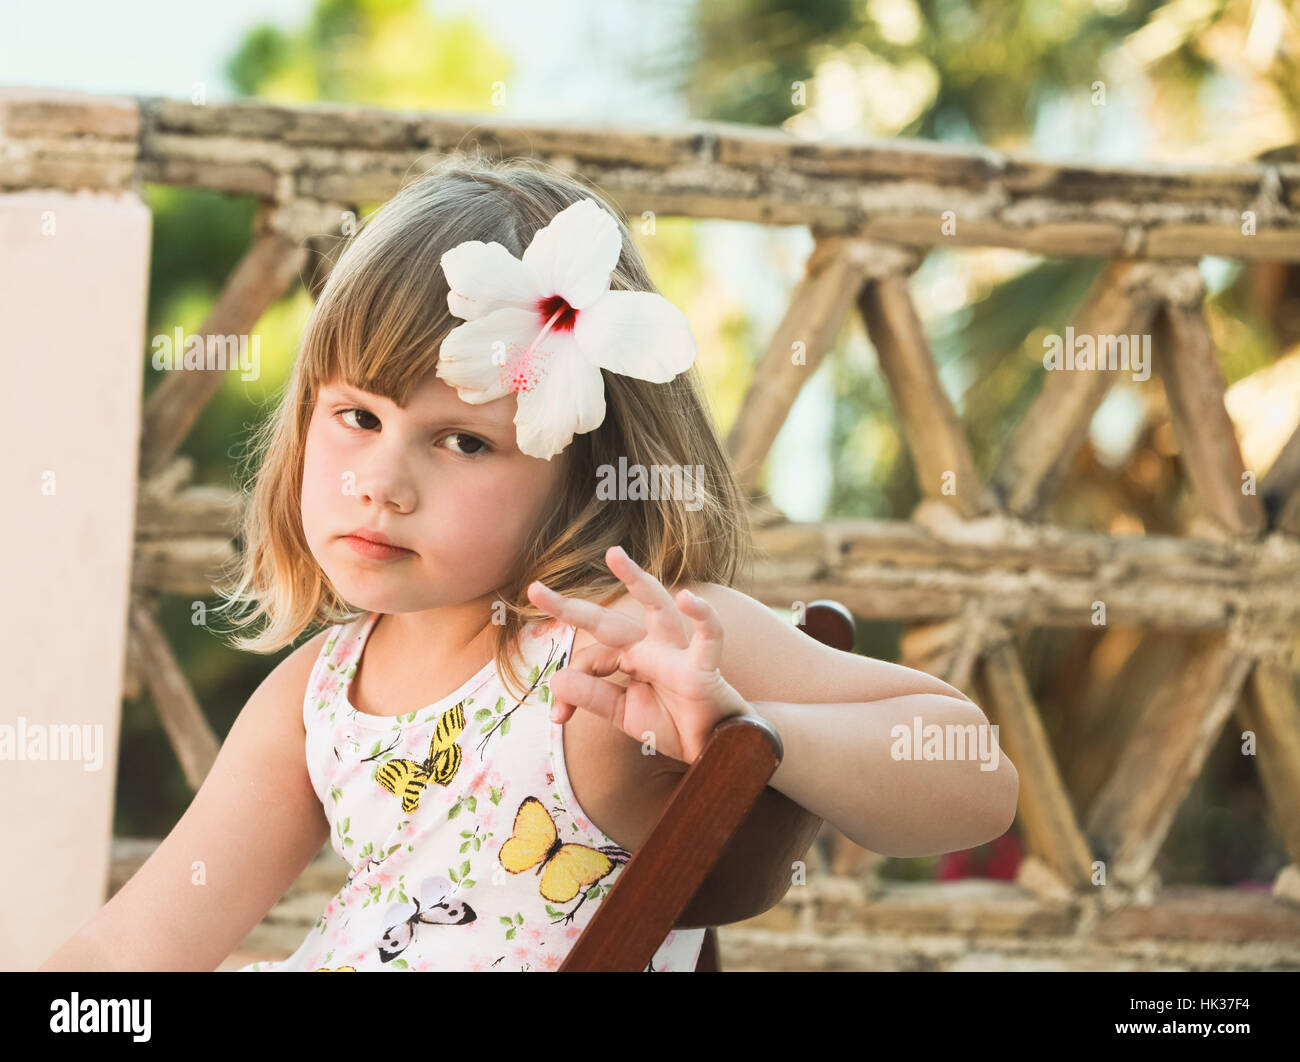 Serious Caucasian little girl with white flower in hair, outdoor portrait Stock Photo